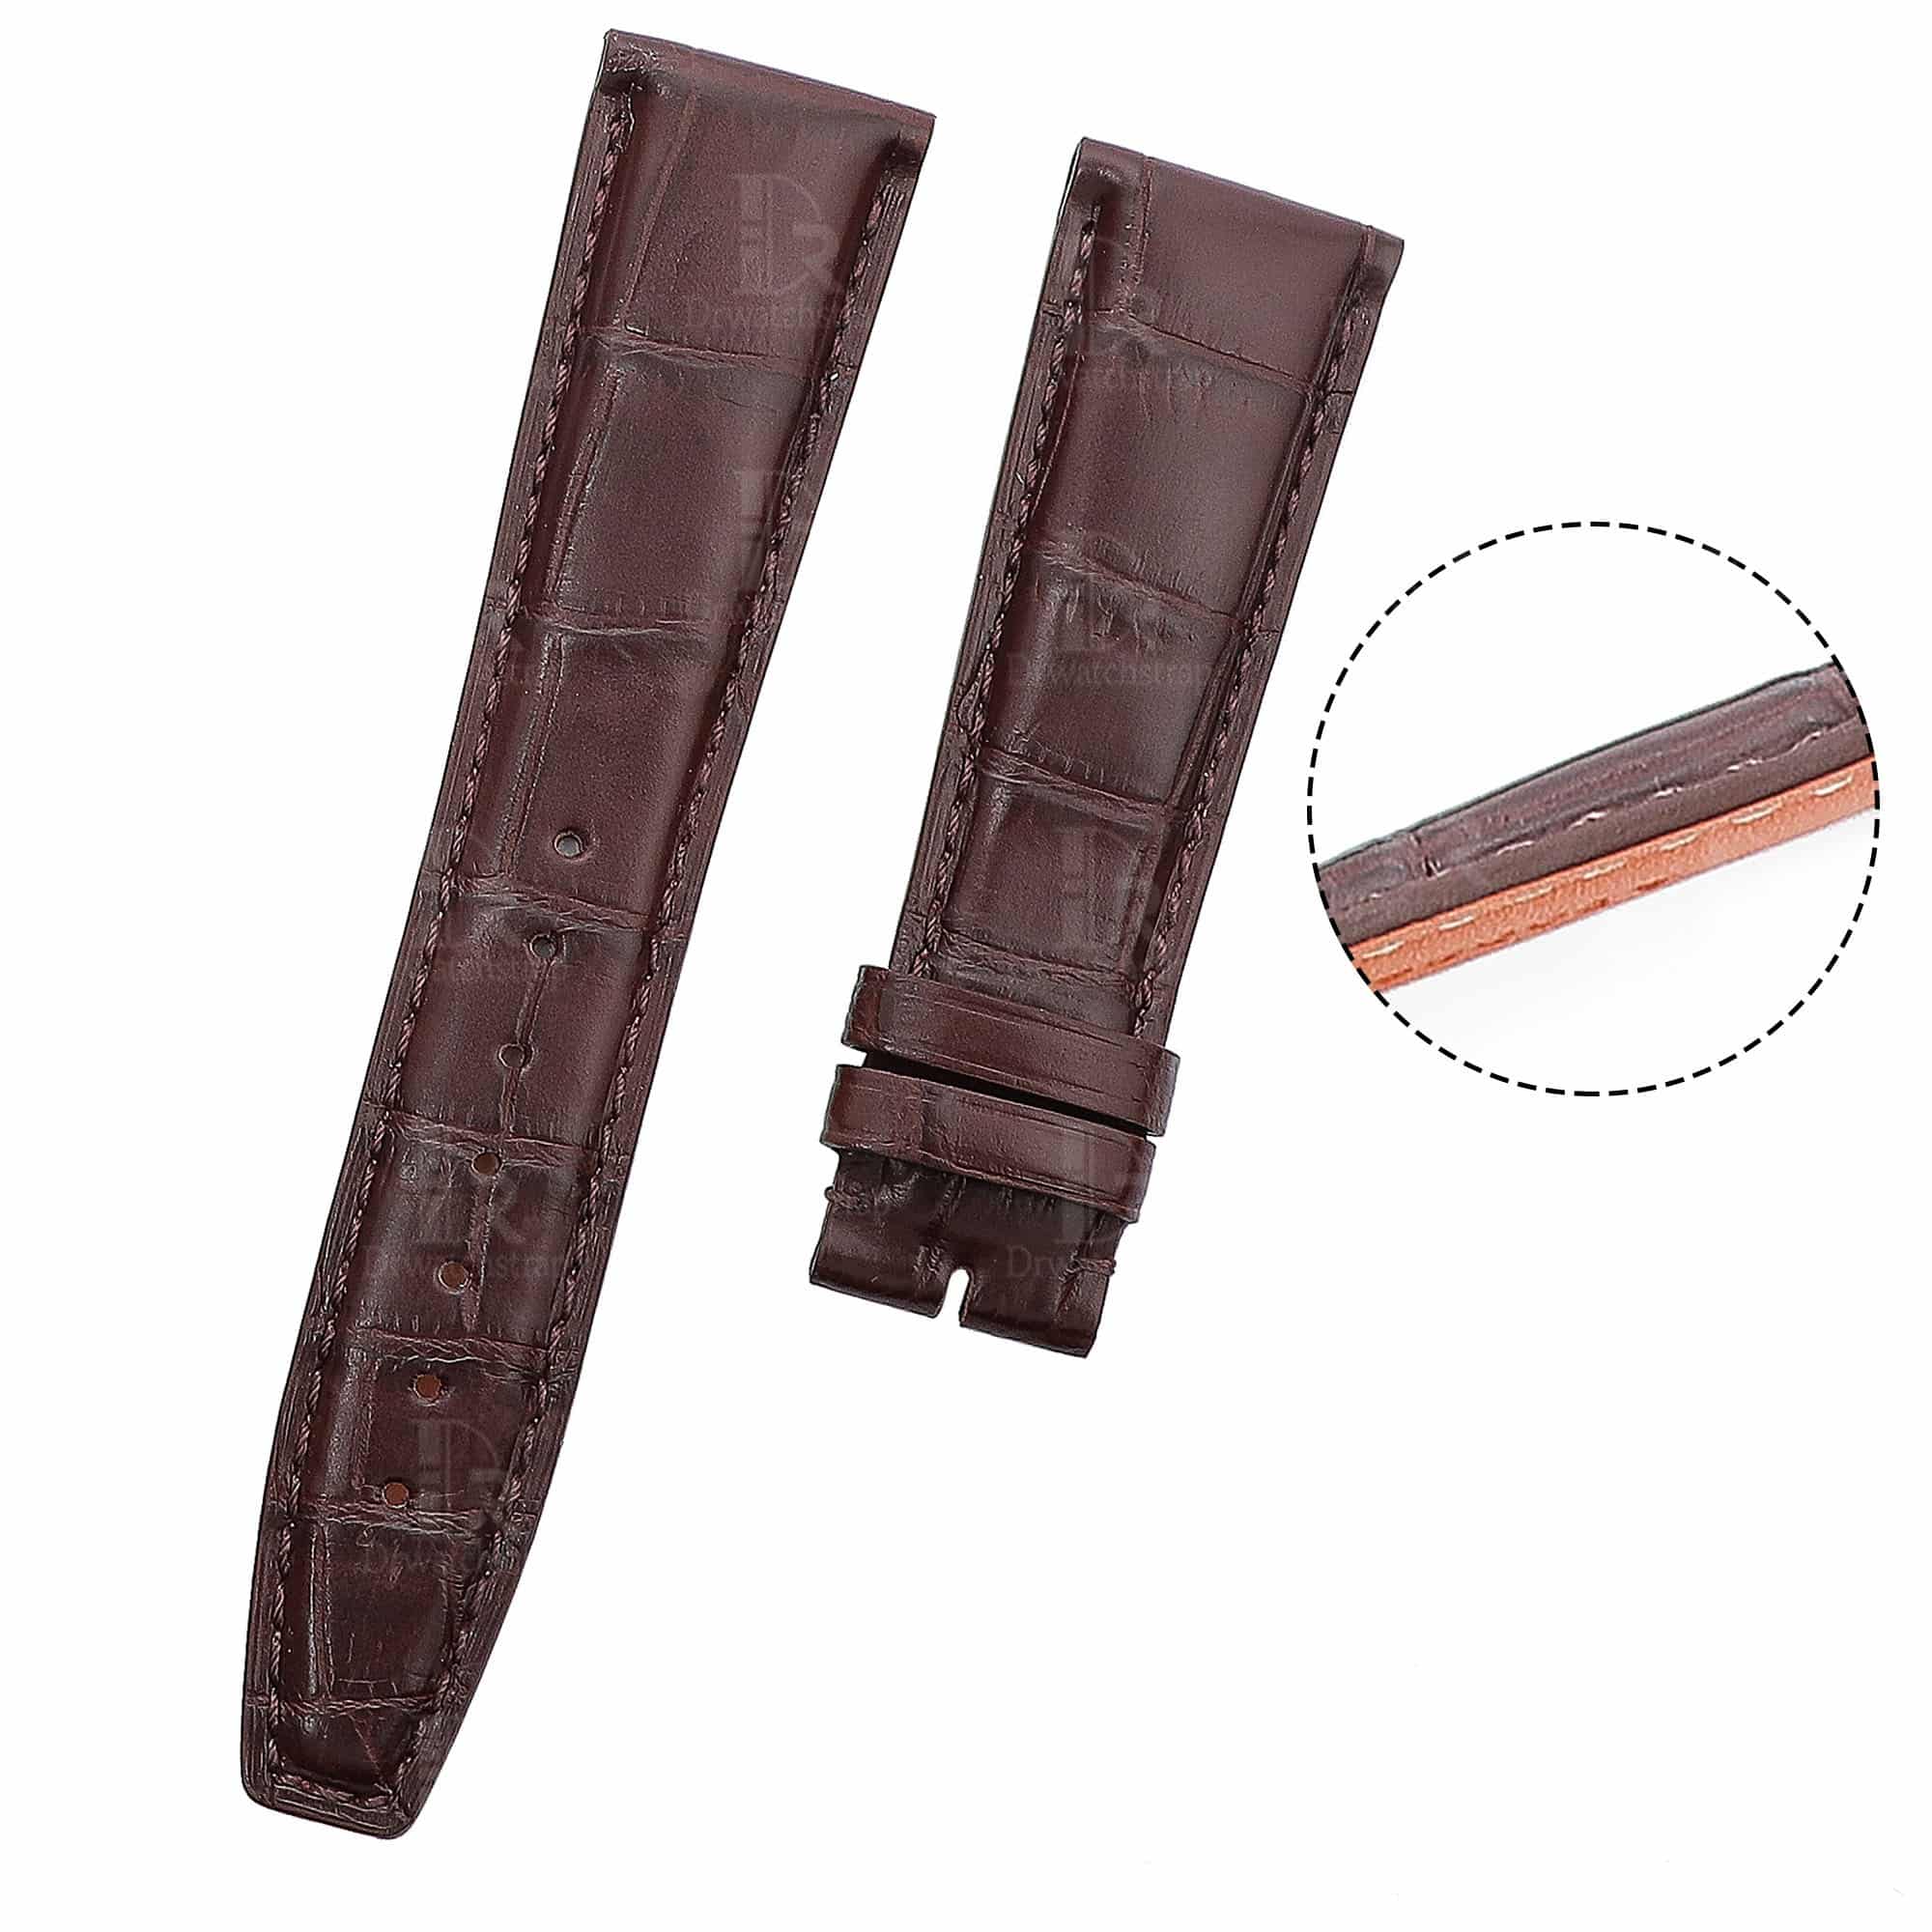 Best quality Grade A alligator Belly-scale brown leather Santoni IWC watch strap and watch band replacement for IWC Portofino / Pilot's watch at a low price - Shop handcrafted OEM watch bands online